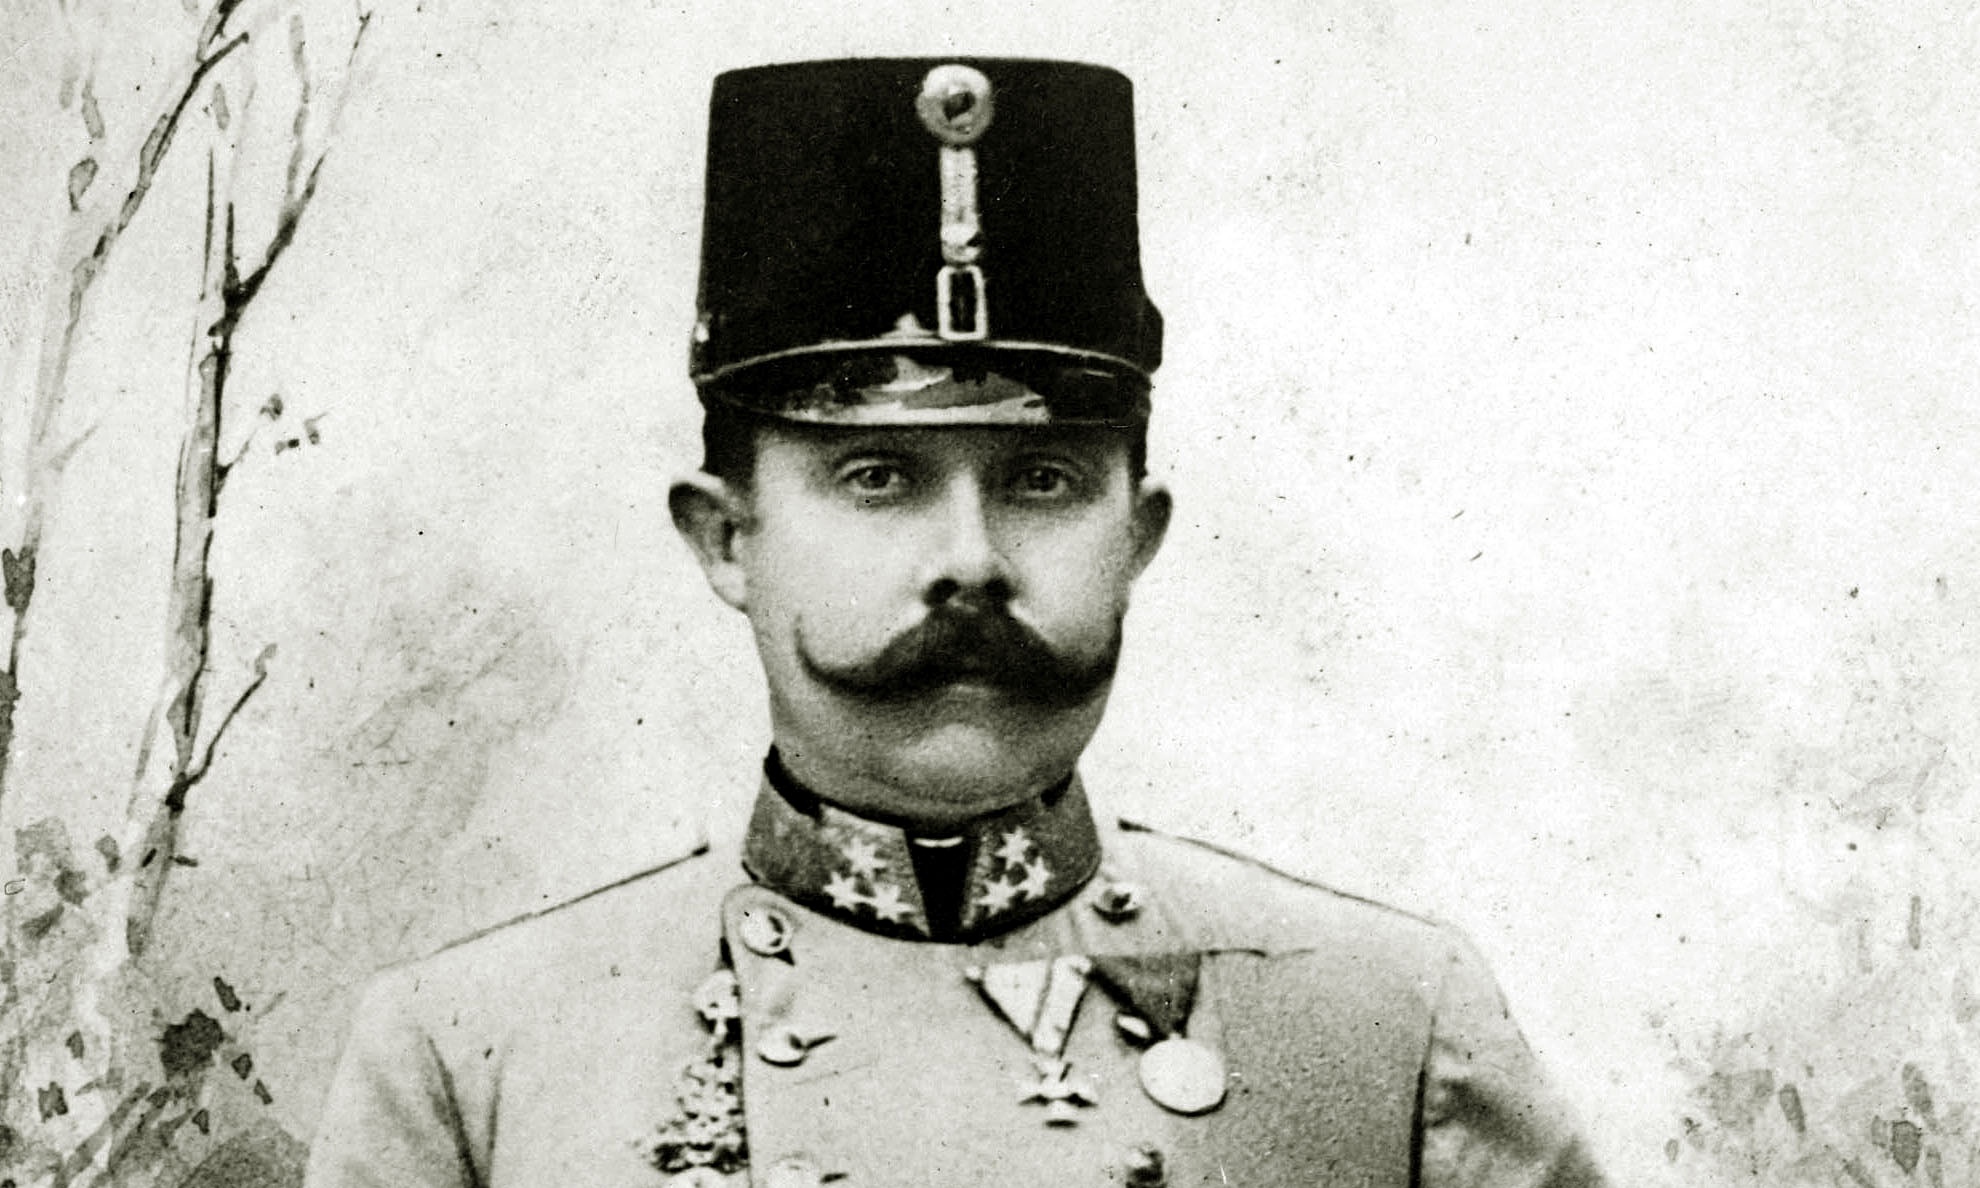 7. Archduke Franz Ferdinand
Francis Ferdinand was the archduke of Austria and his untimely assassination was considered to be the catalyst for World War I. It’s no coincidence that World War I started just a month after Ferdinand was assassinated, in cold blood.